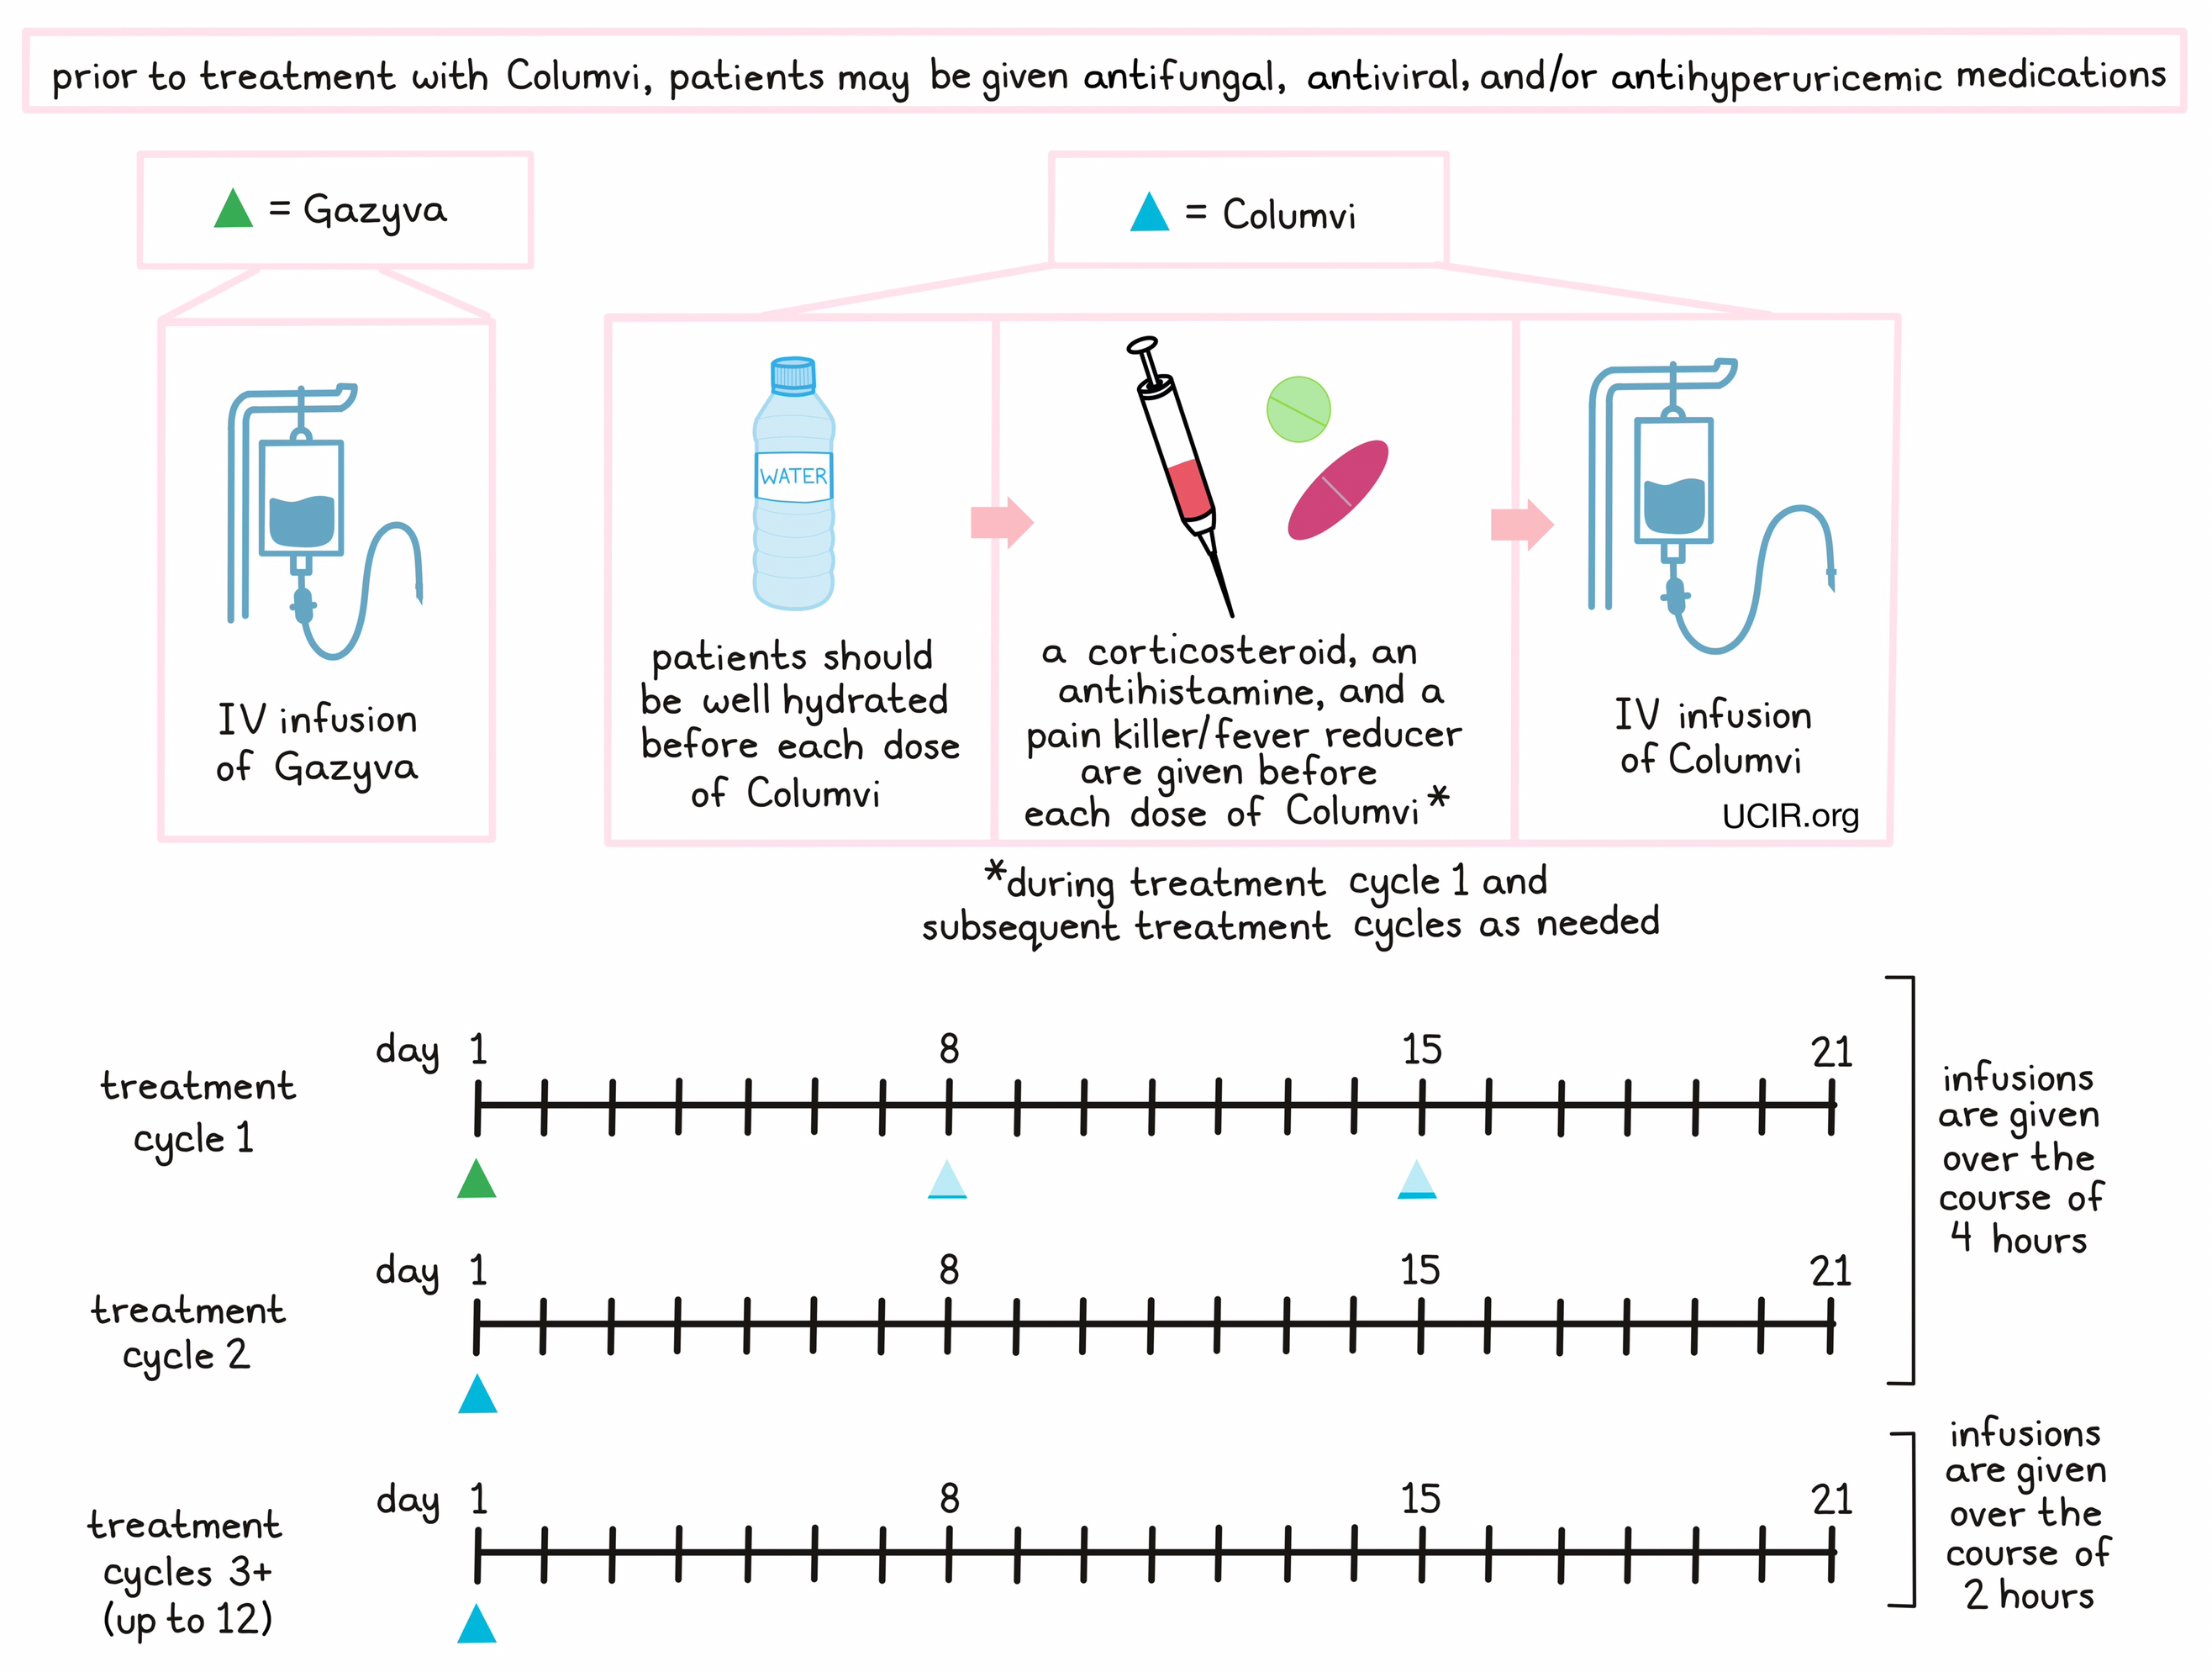 Illustration showing how Columvi is administered to patients